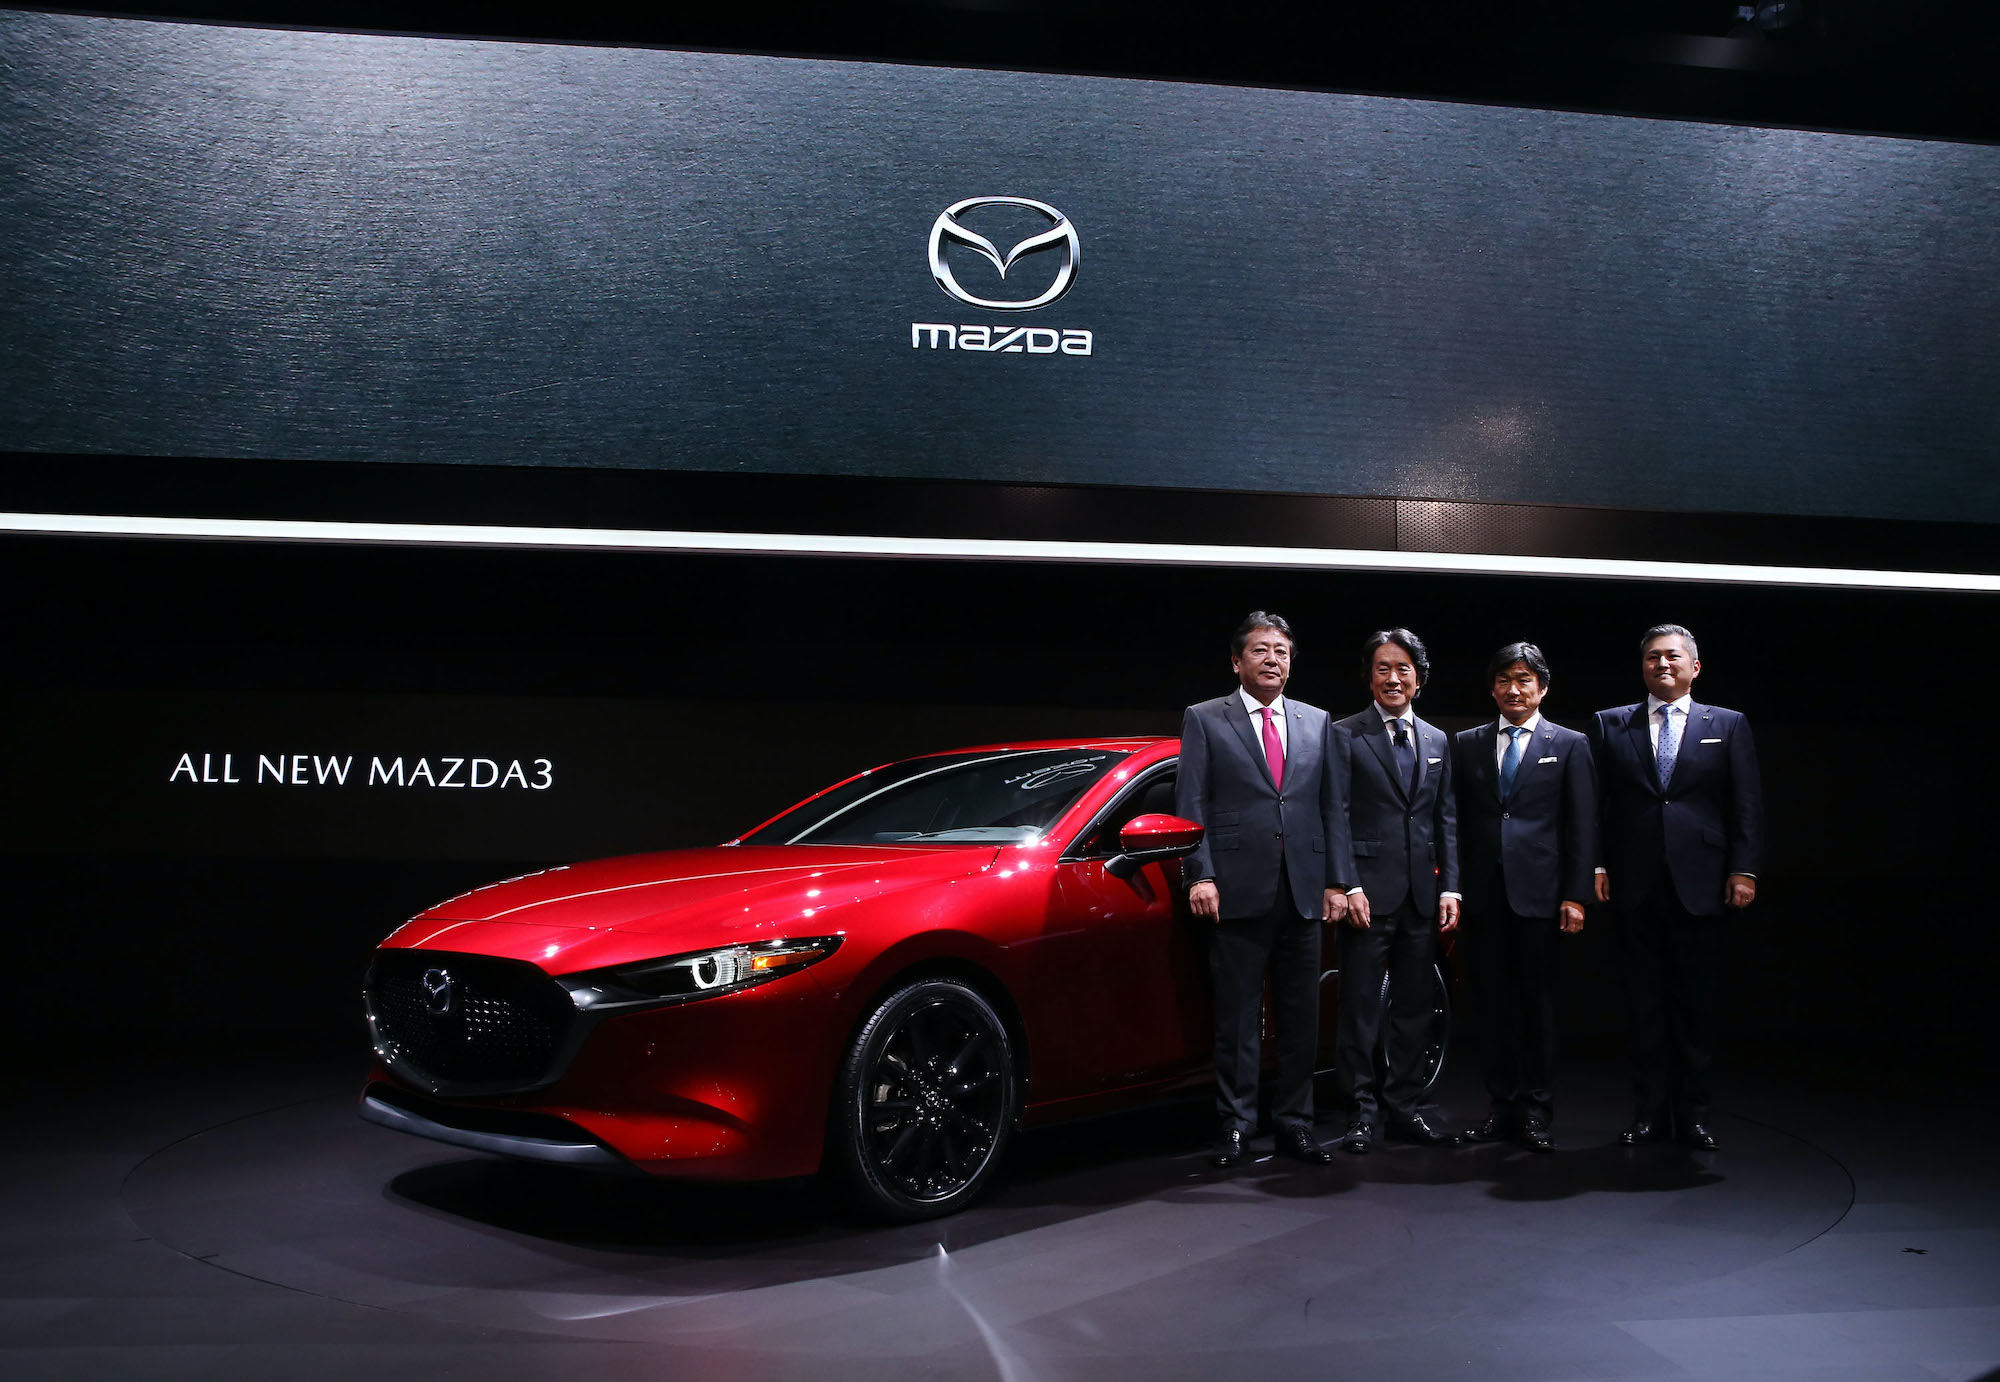 The all new Mazda3 during the L.A. Auto Show